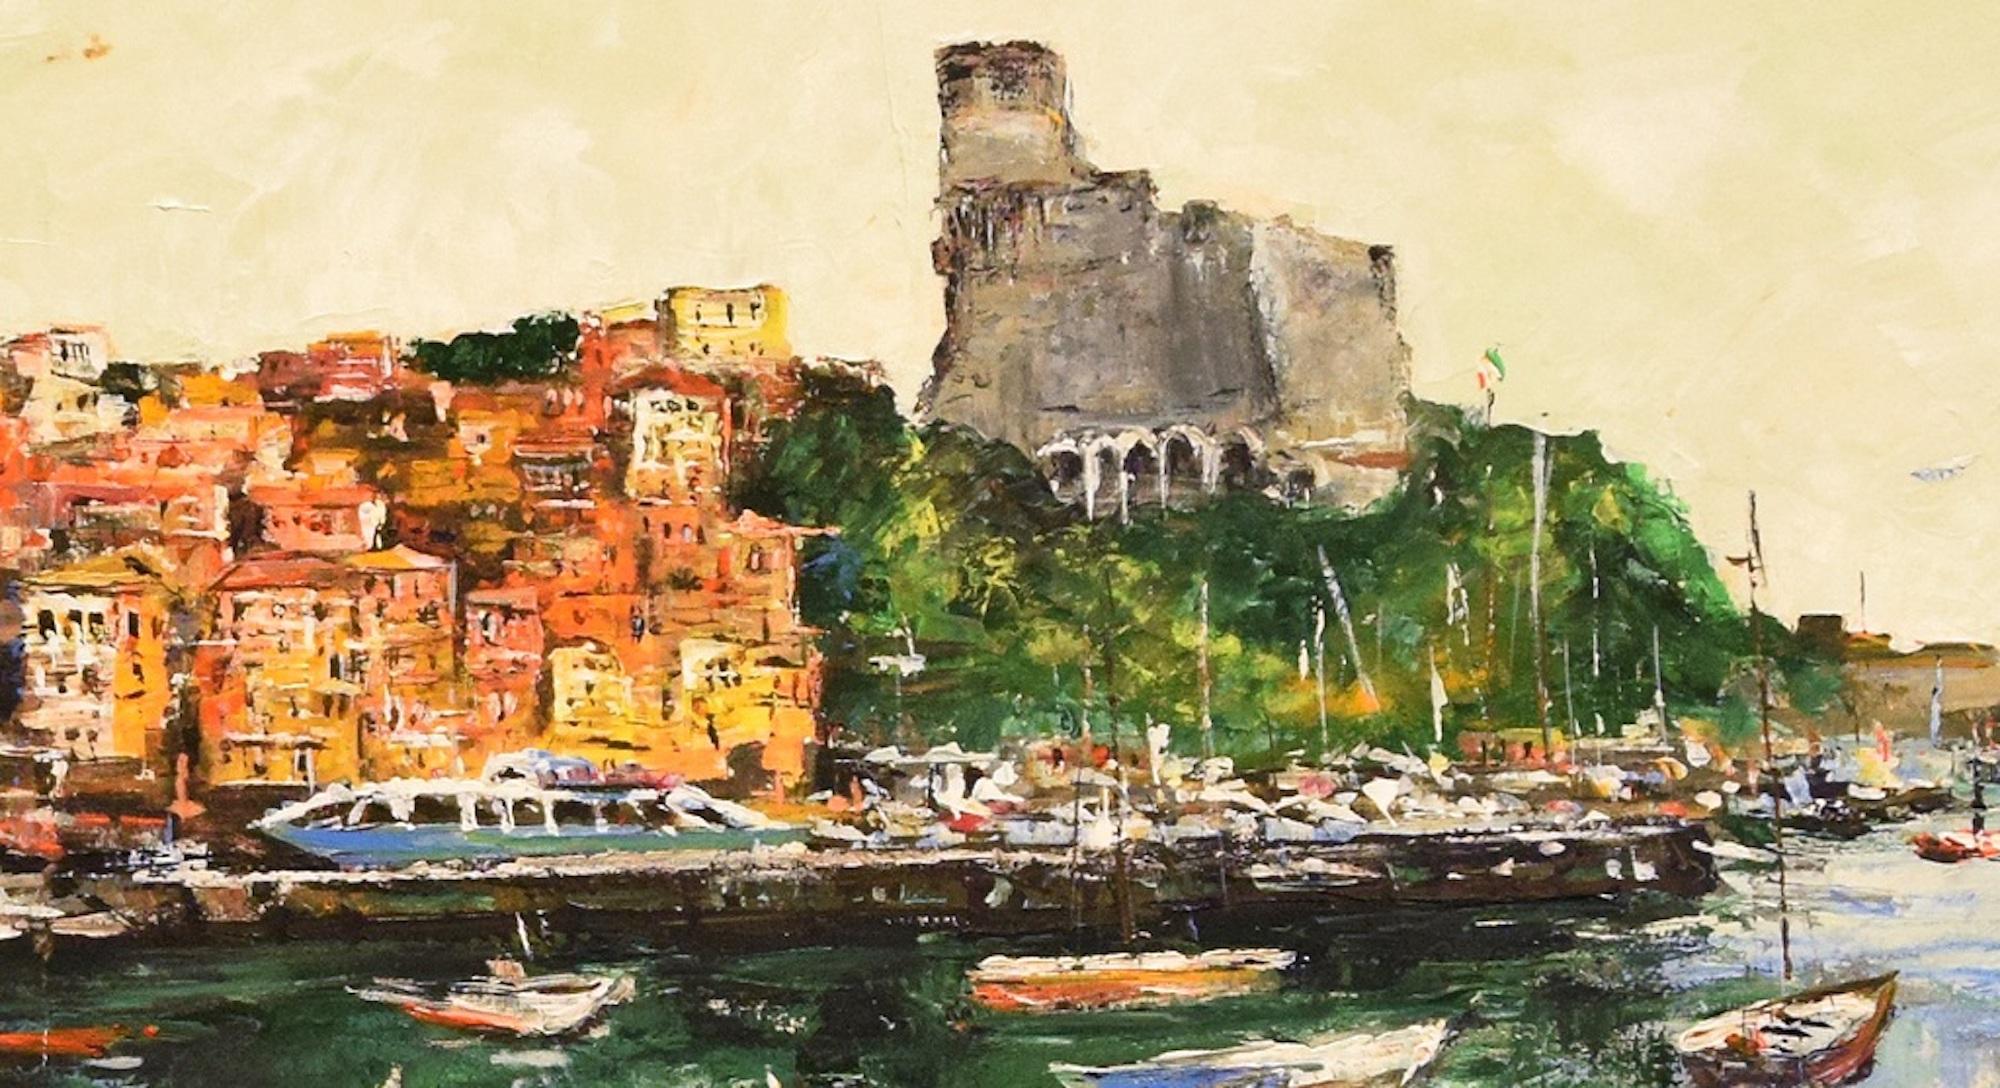 Lerici is a very colorful oil painting on canvas realized by the Italian contemporary artist Luciano Sacco in the 1970s.

Including a frame (73 x 93cm). Hand-signed by the artist on the lower right. Titled on the back.

Very good conditions.

This